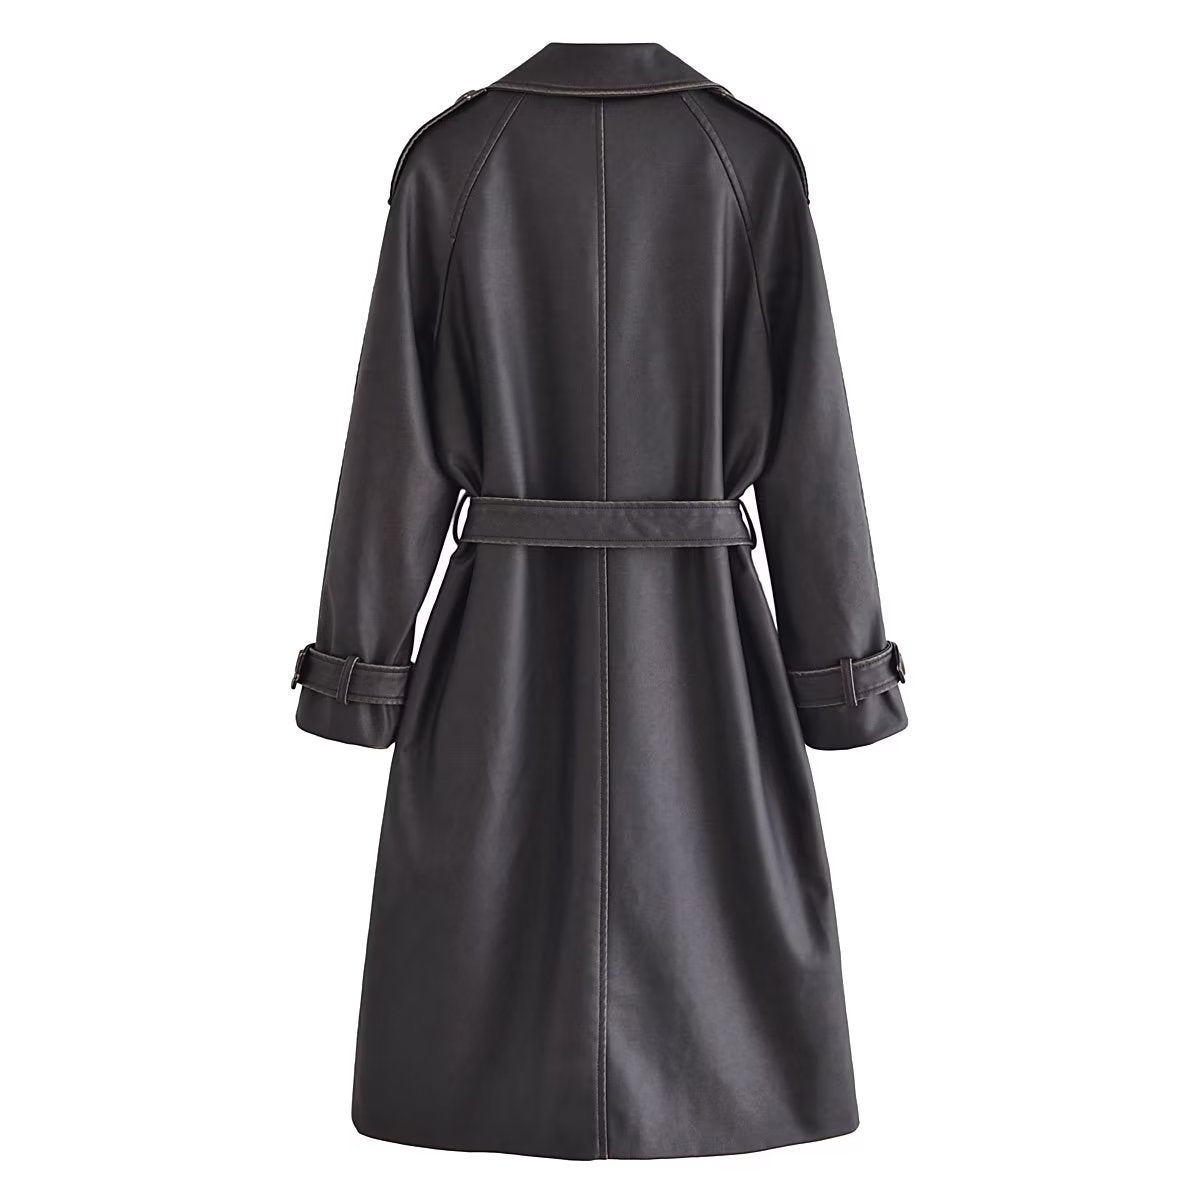 Autumn Winter Women Long Sleeve Collared Bow Waist Distressed Effect Faux Leather Trench Coat